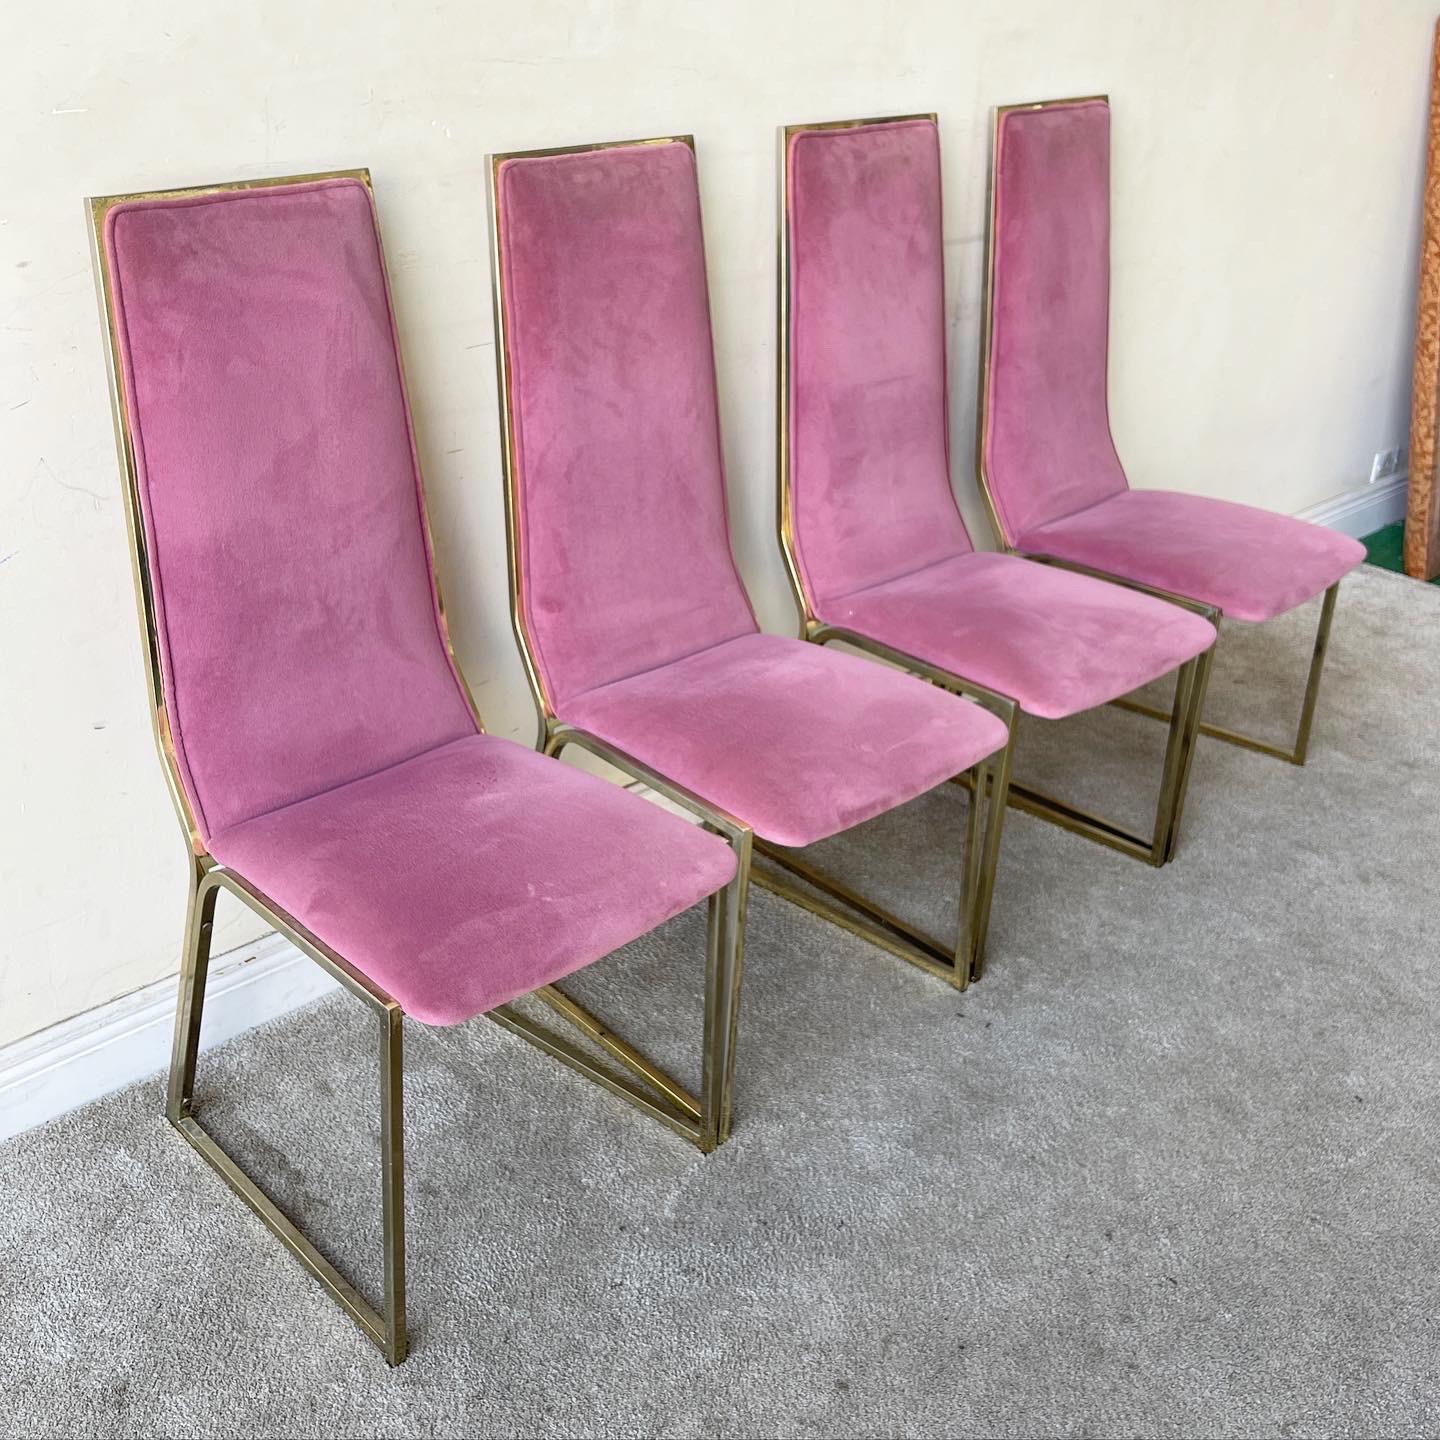 Amazing set of 4 vintage postmodern dining chairs. Each feature a pink velvet fabric back rest and seat. The frame is a gold finished metal.

Additional information:
Materials: Fabric, Velvet
Color: Pink
Style: Postmodern
Time Period: